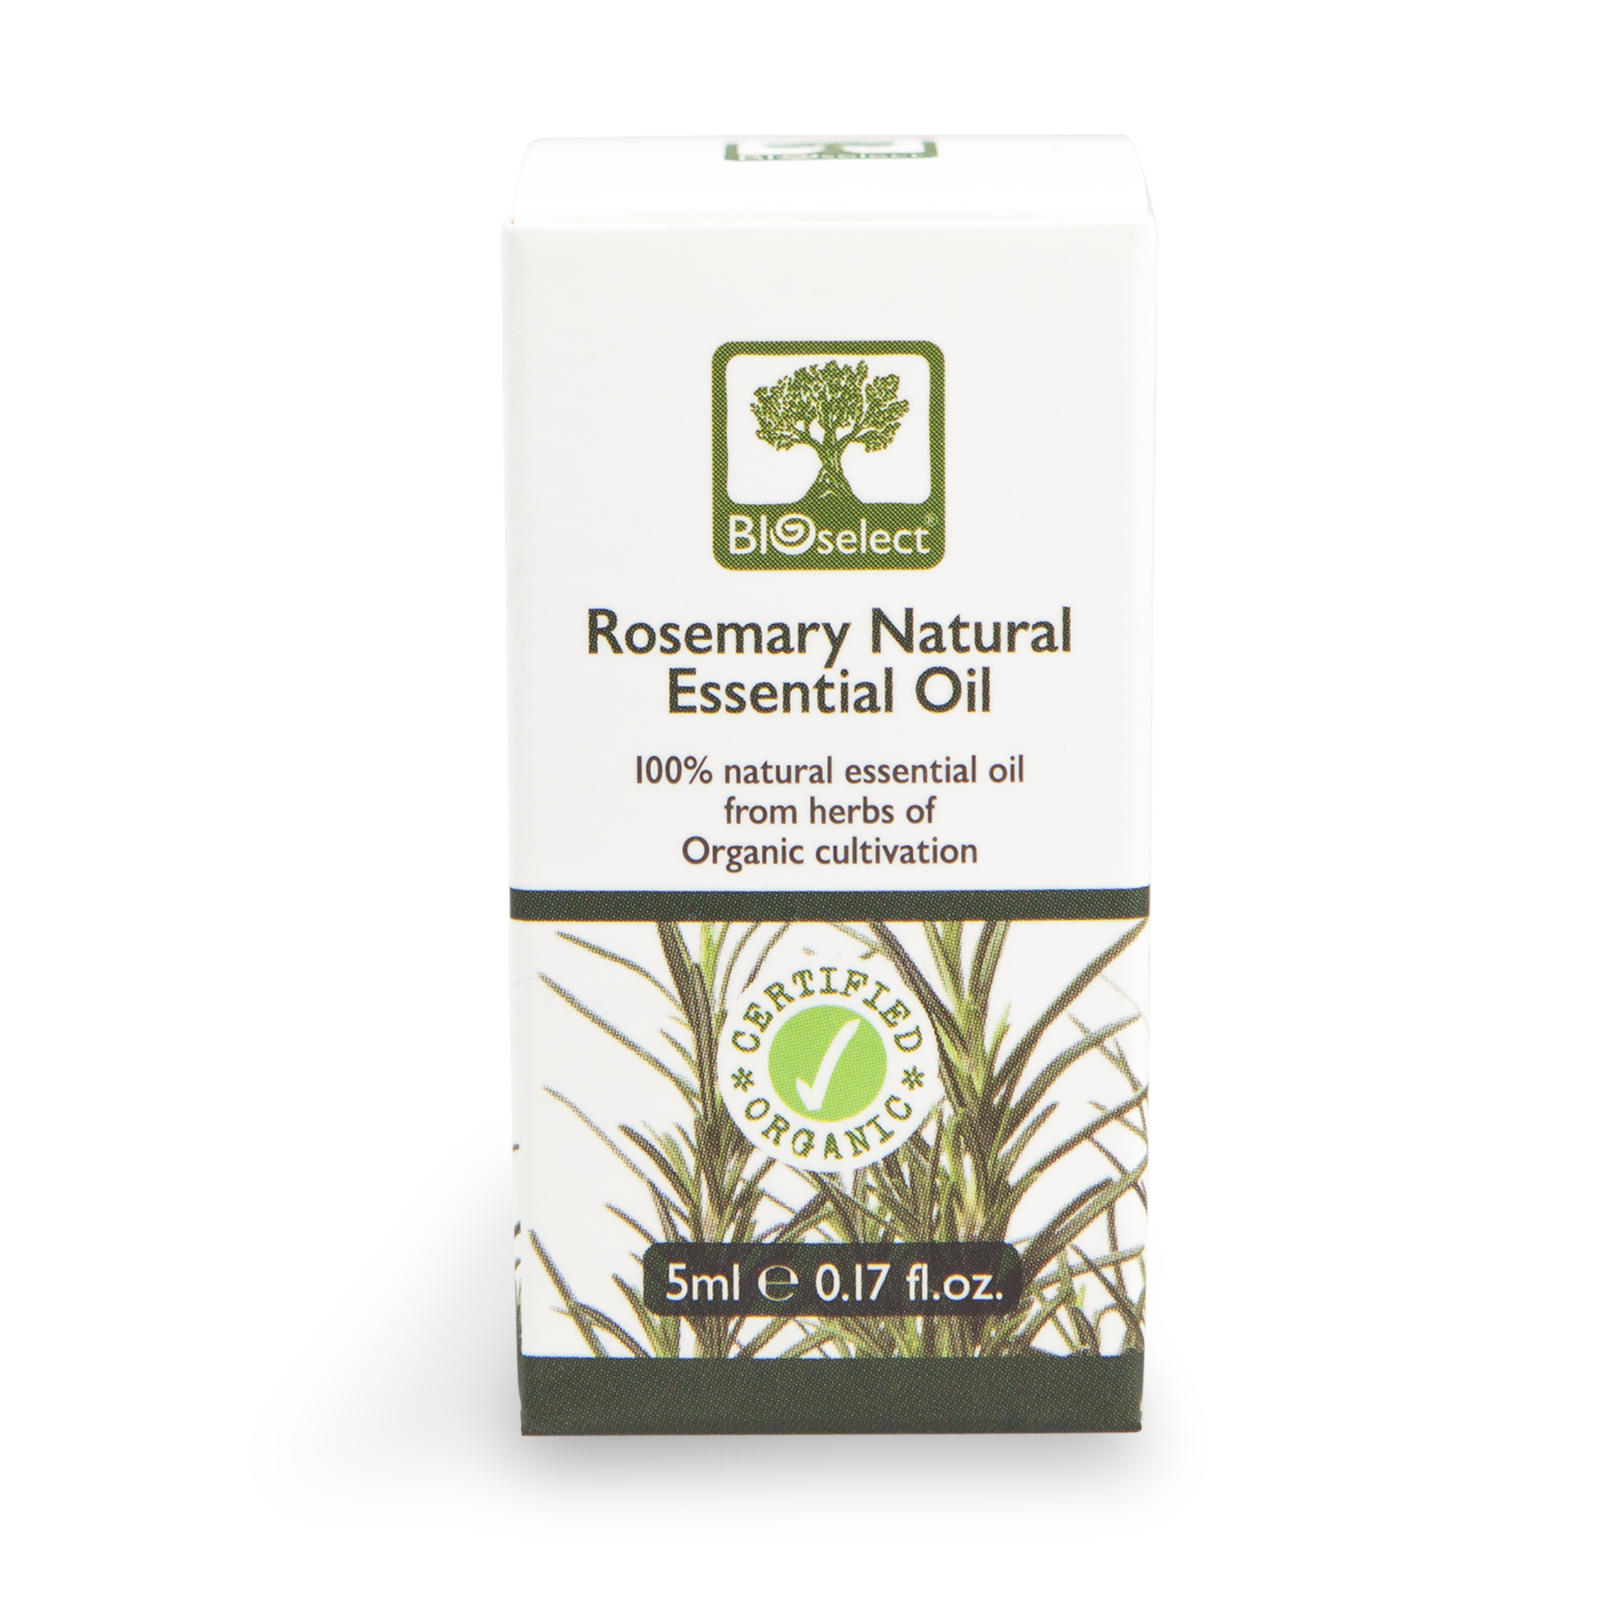 Bioselect Rosmary Natural Essential Oil Certified Organic